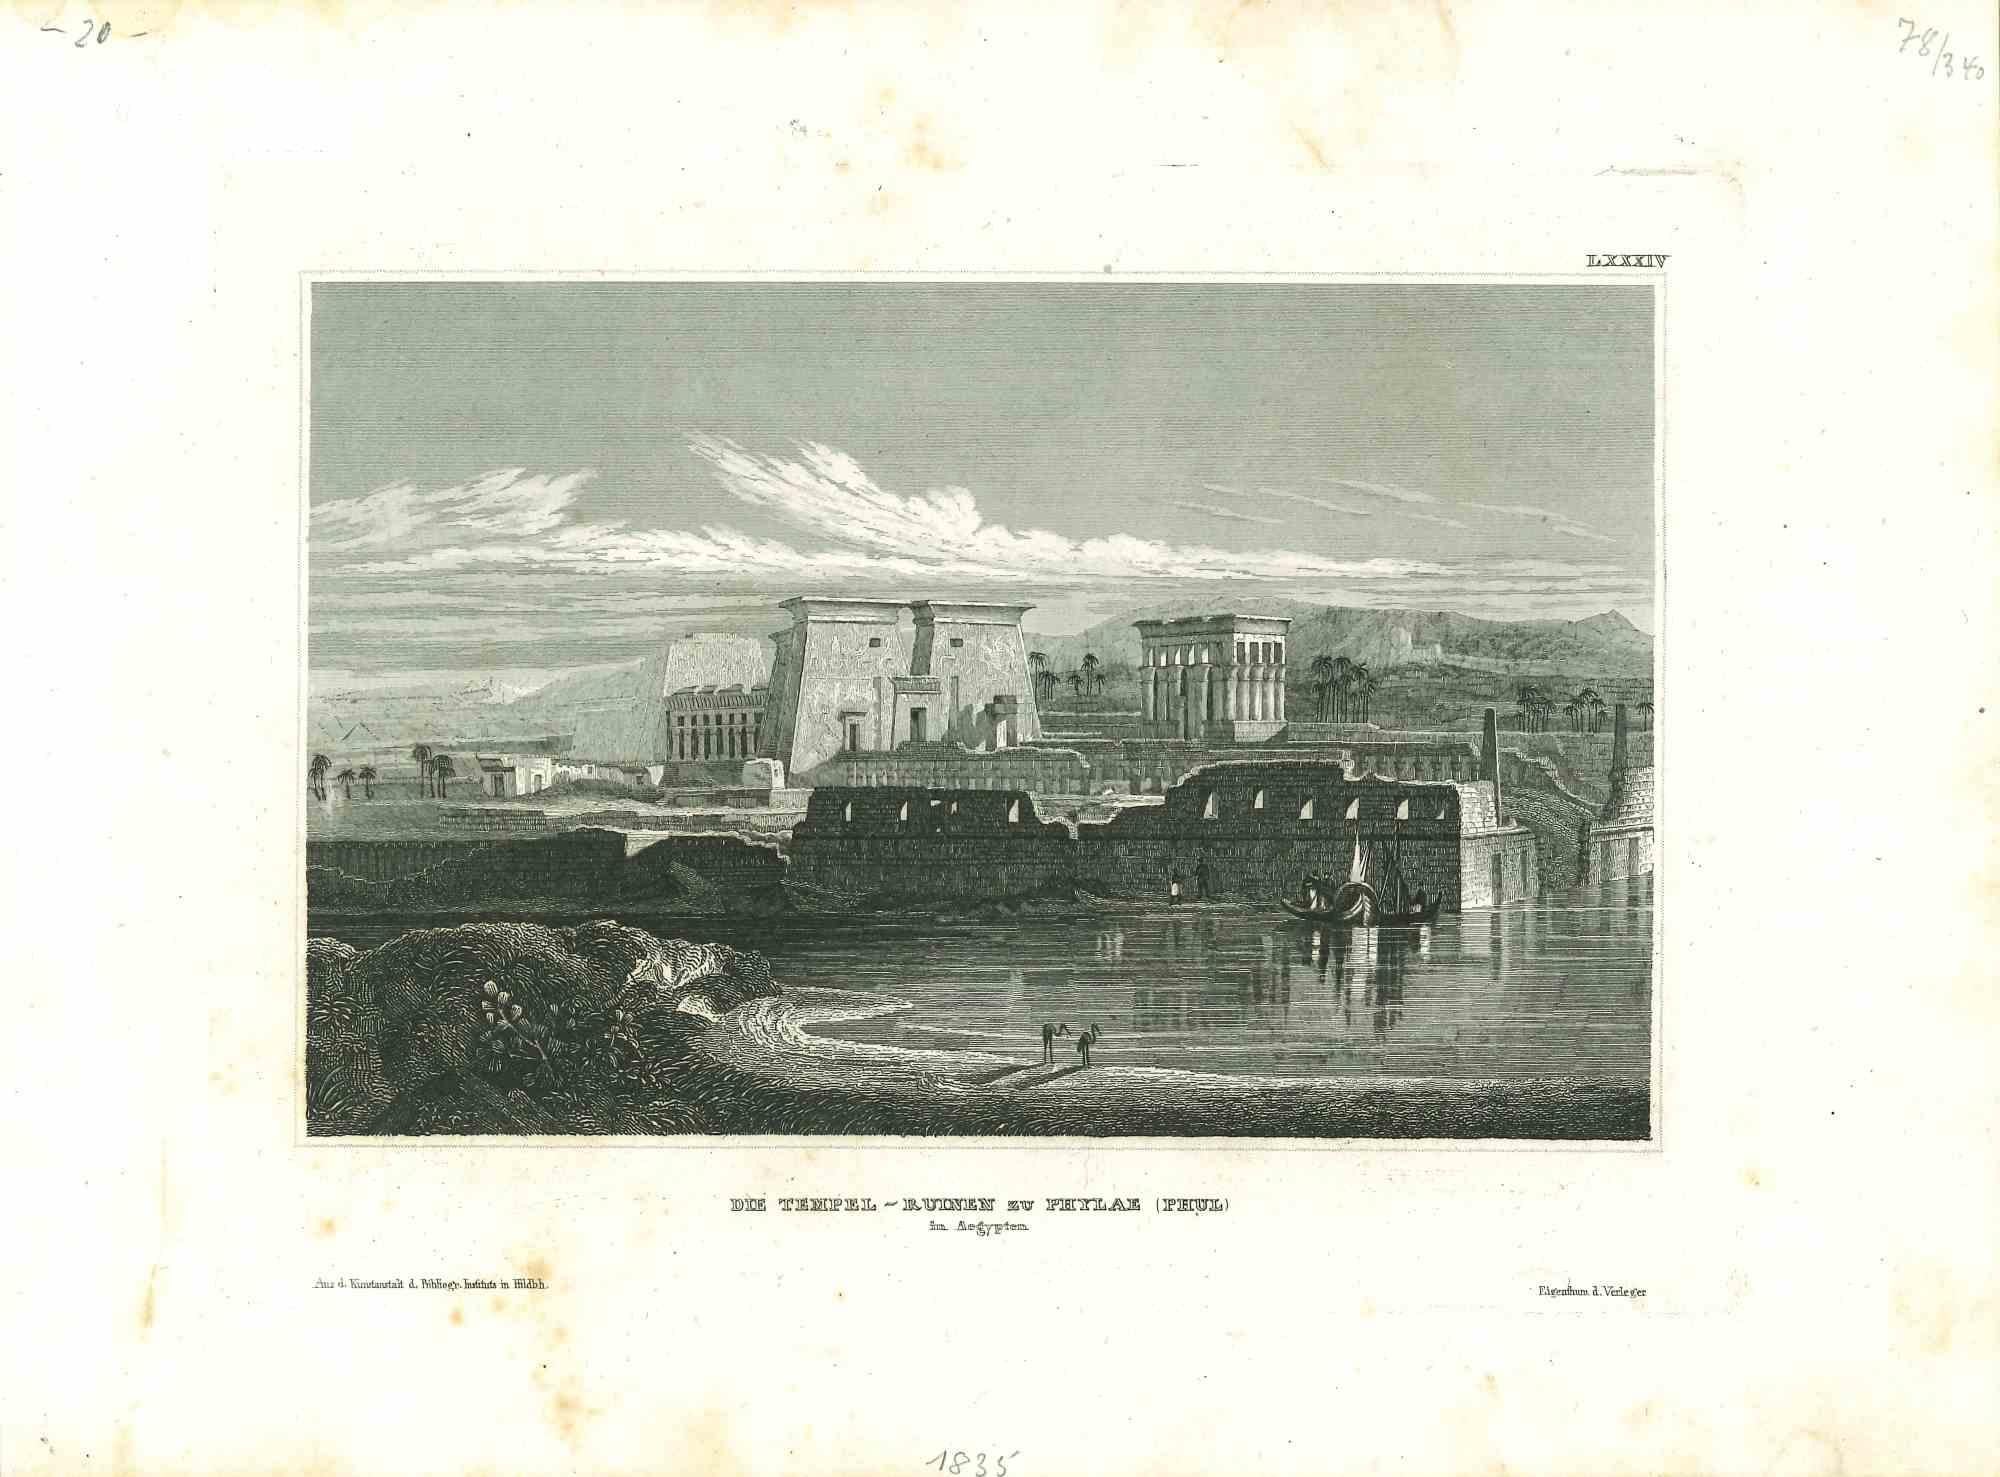 Unknown Landscape Print - Ancient View of The Ruins of Philae - Original Lithograph - Mid-19th Century